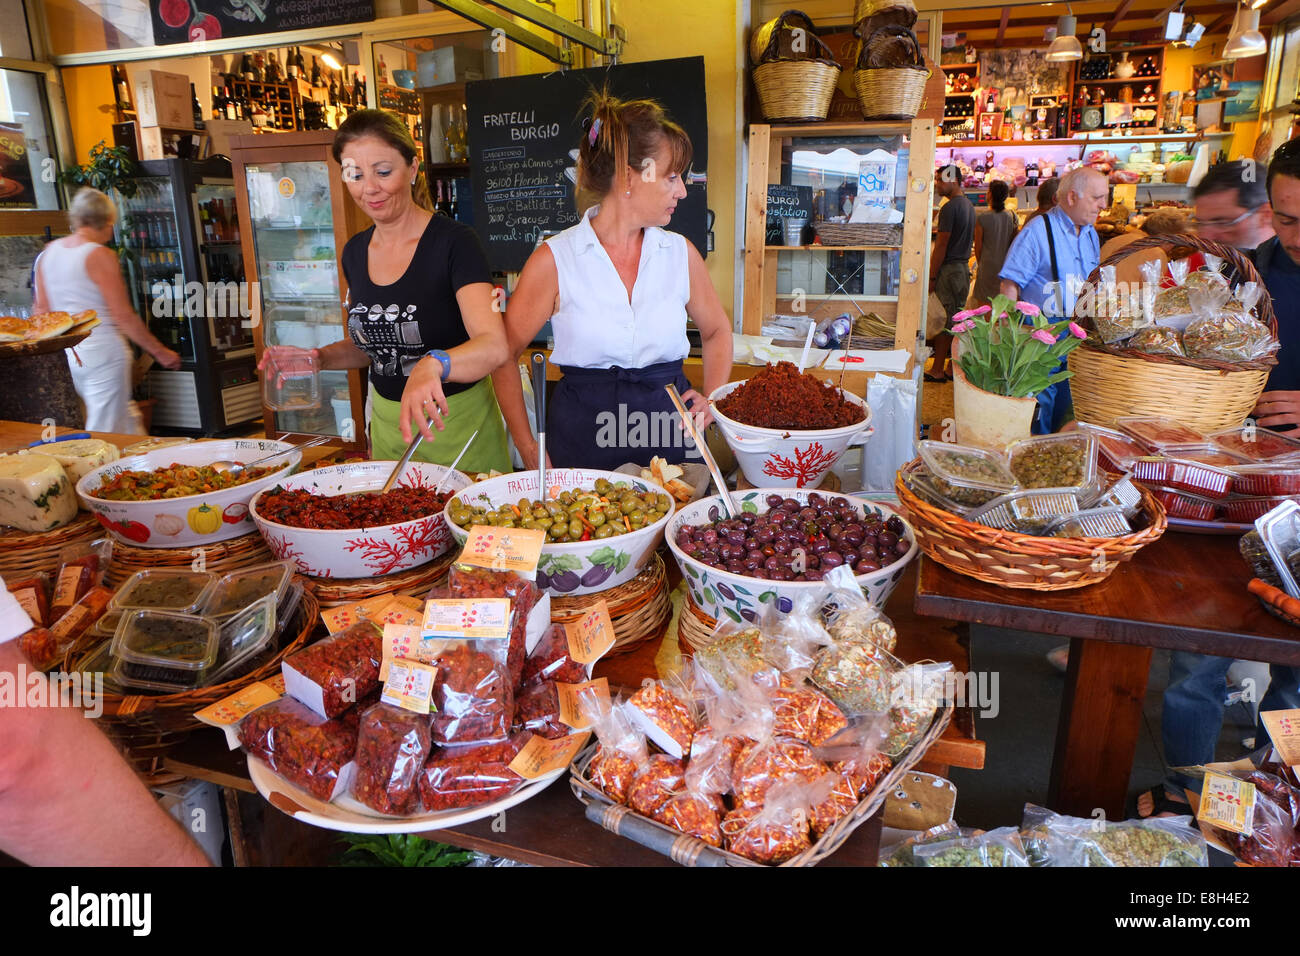 STREET MARKET STALL,CHARCUTERIE,SYRACUSE SICILE,Italie Banque D'Images